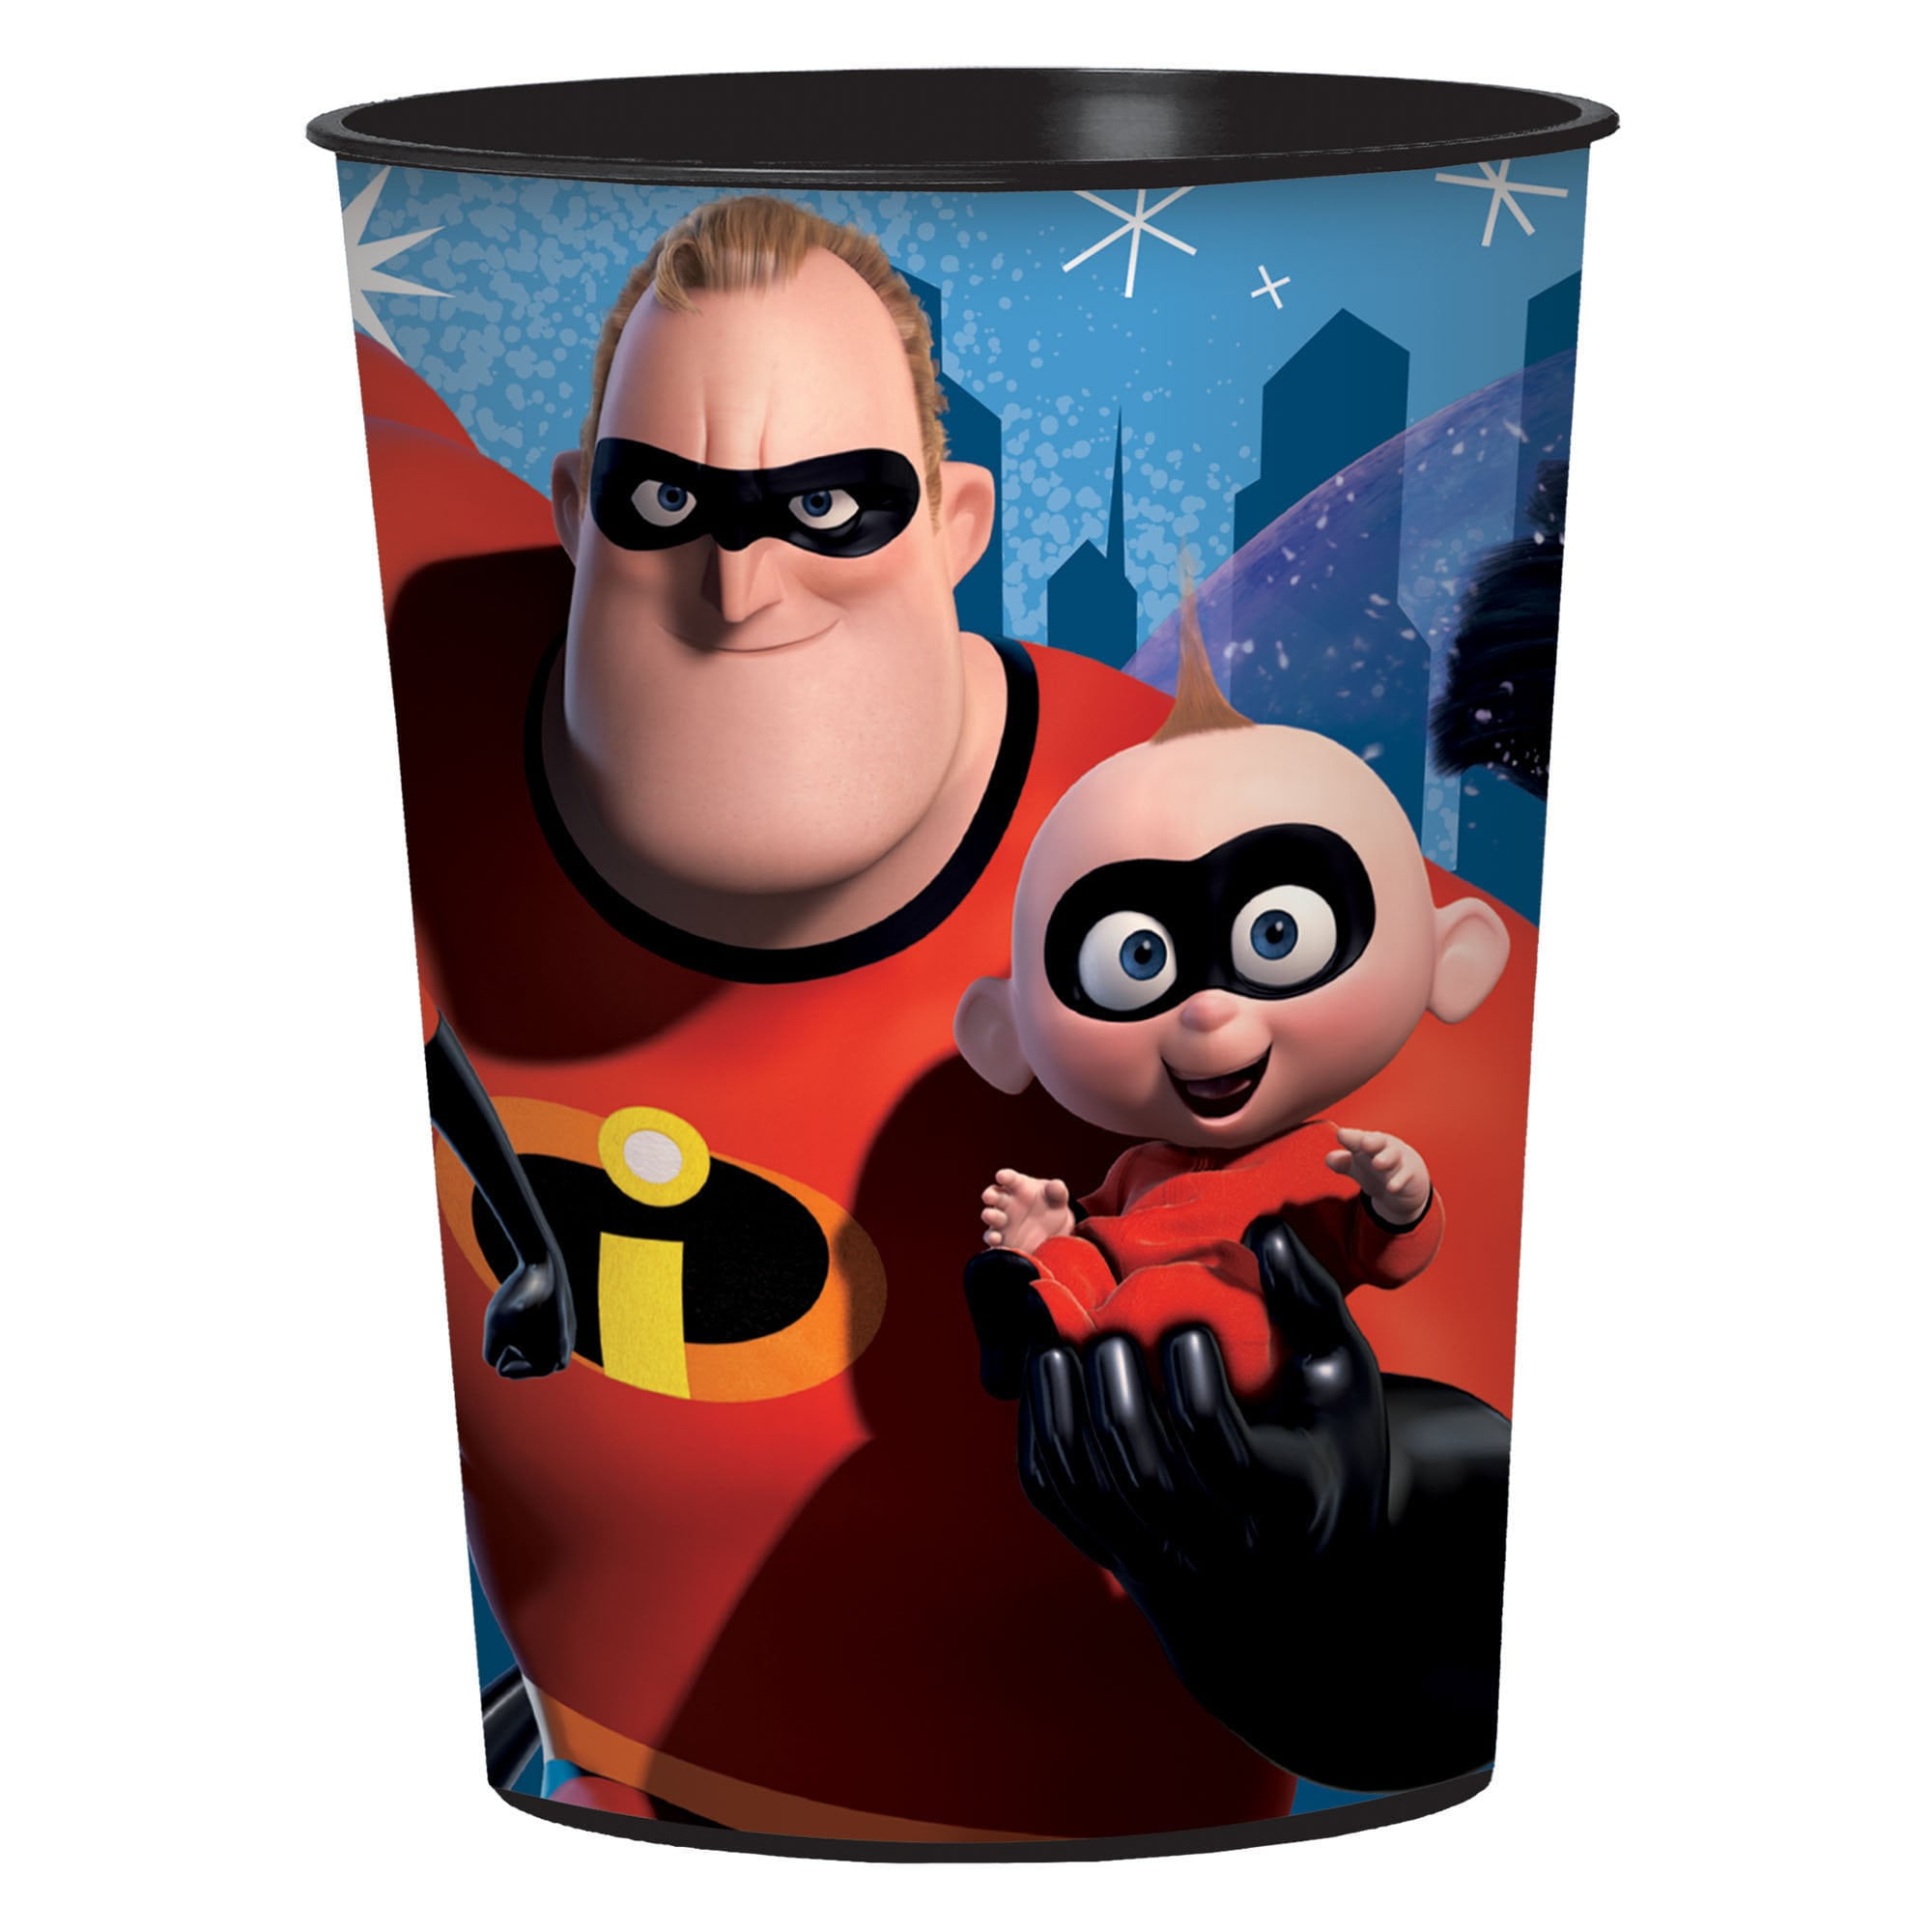 Disneys The Incredibles 2 Birthday Party Supplies 48 Pack Lunch Napkins BirthdayExpress 